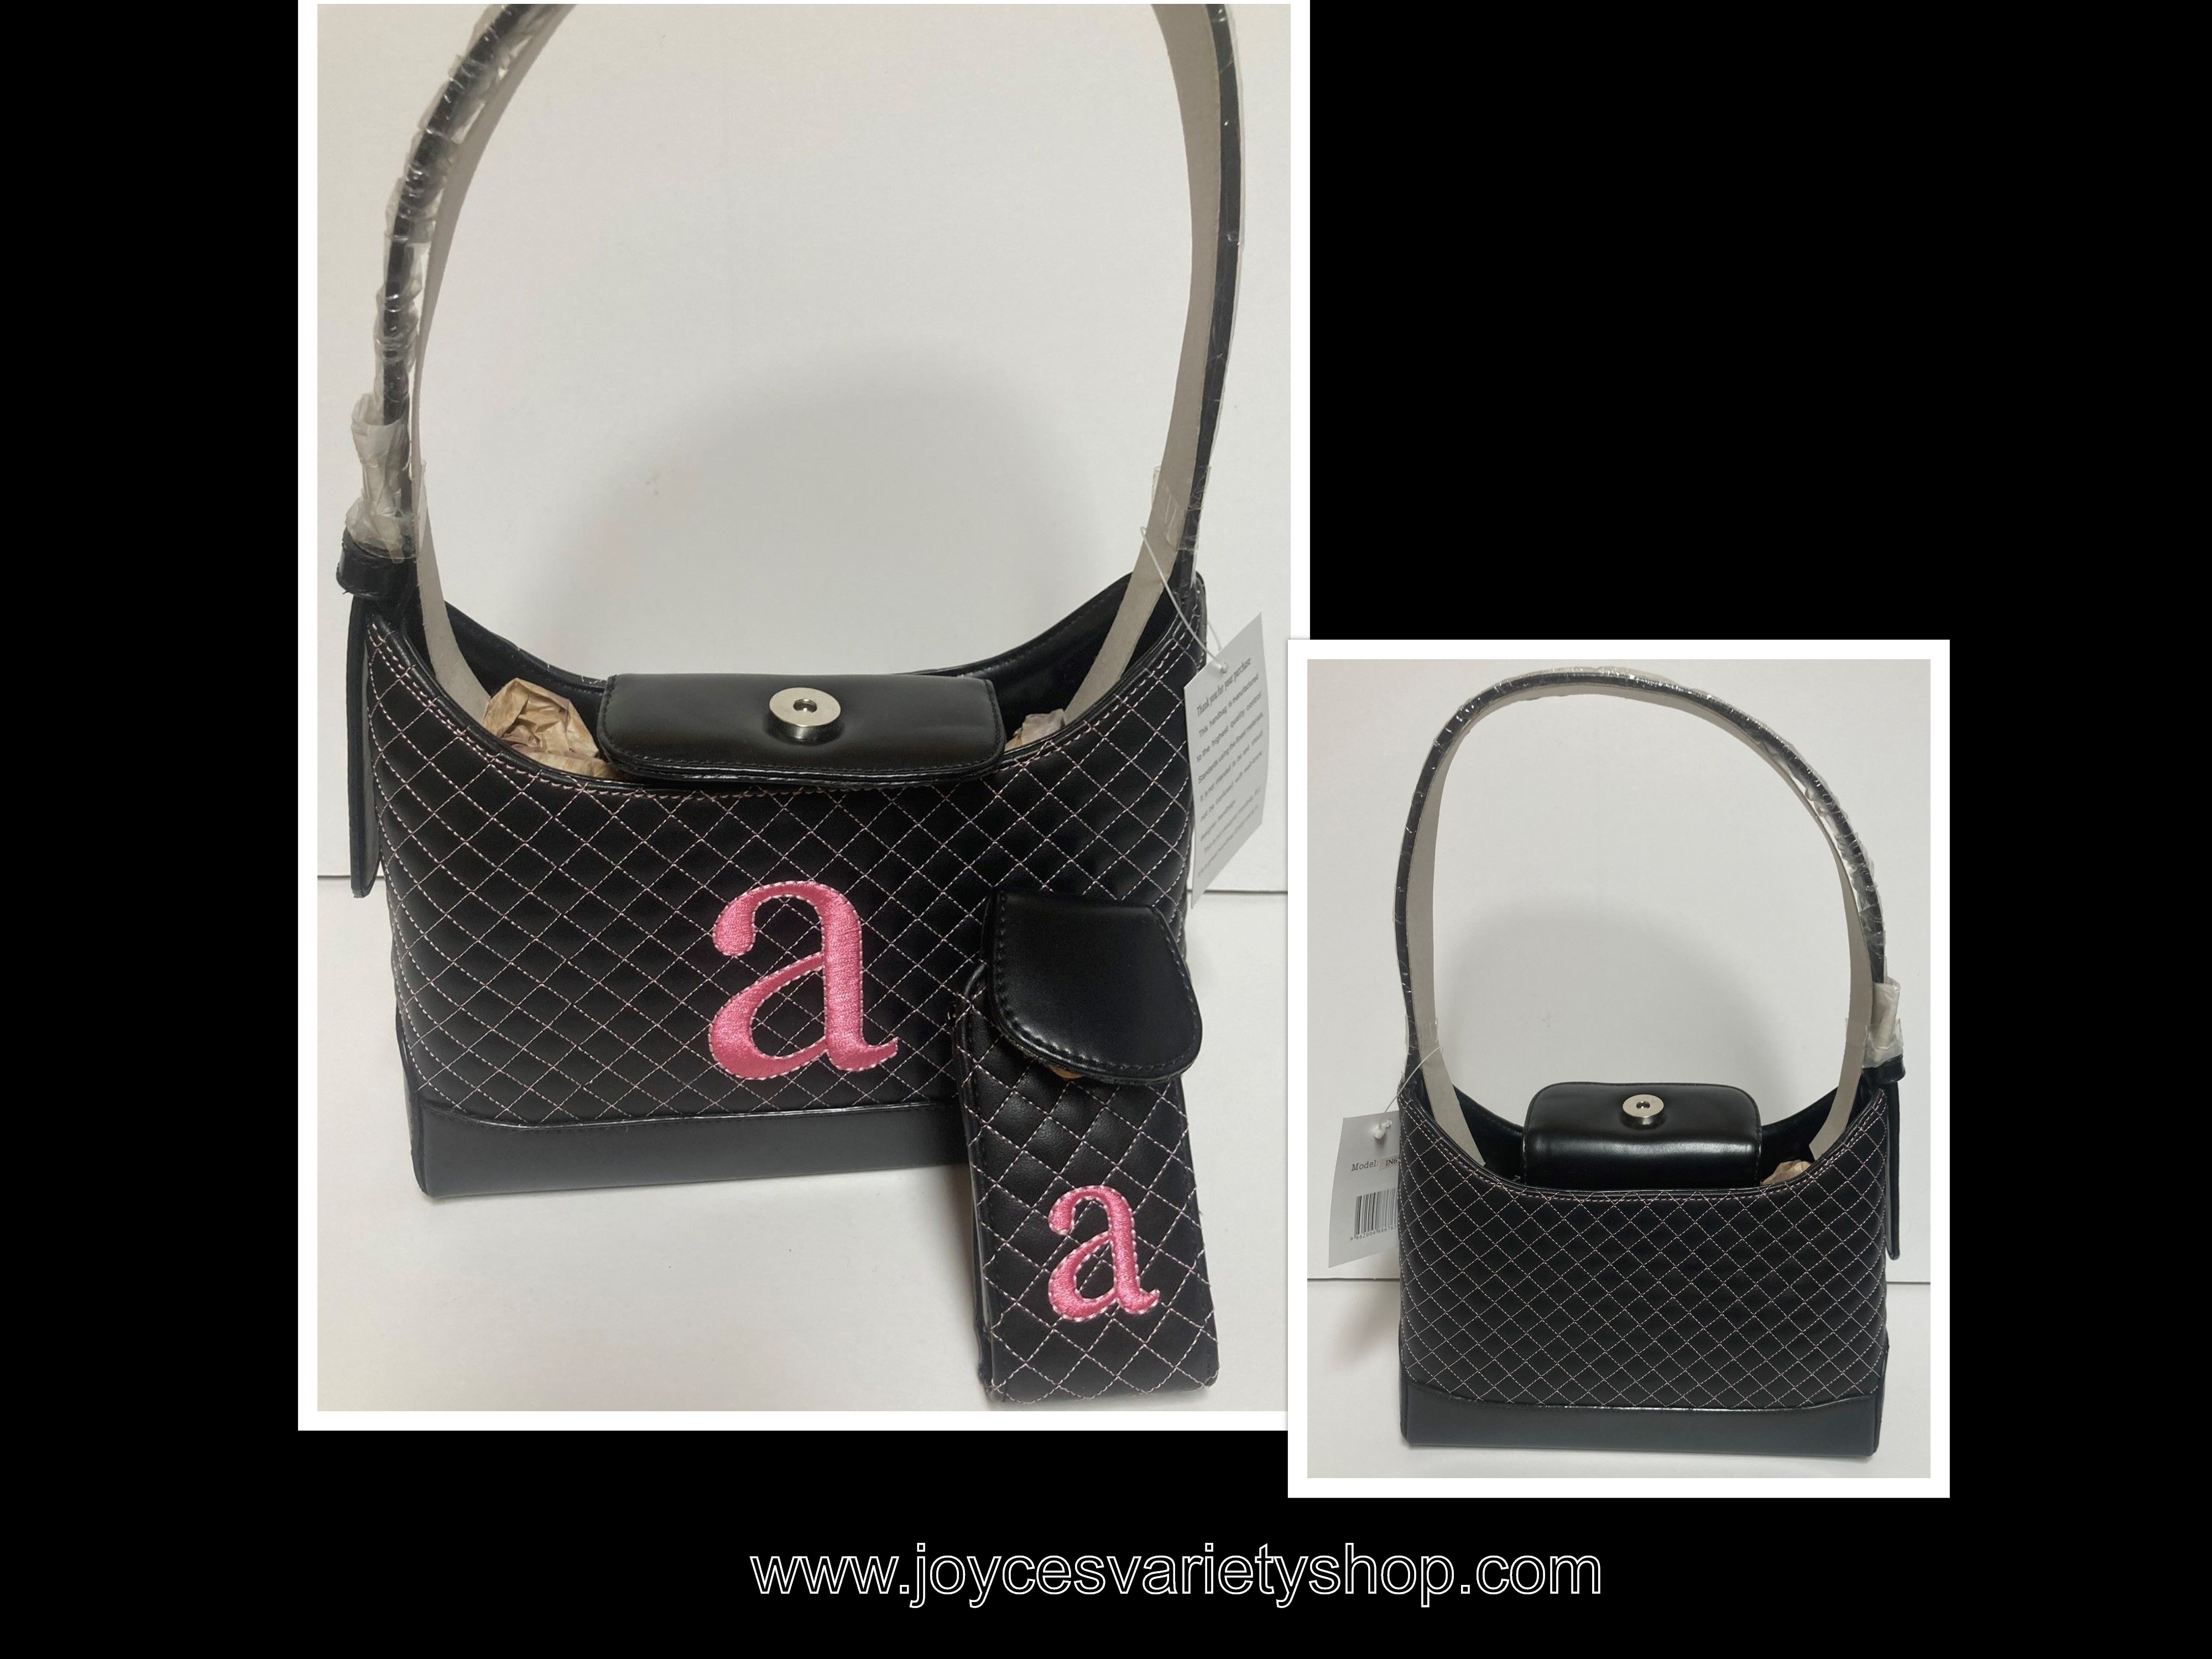 Monogrammed Faux Leather Handbag Purse Black Name Initial "A" in Pink